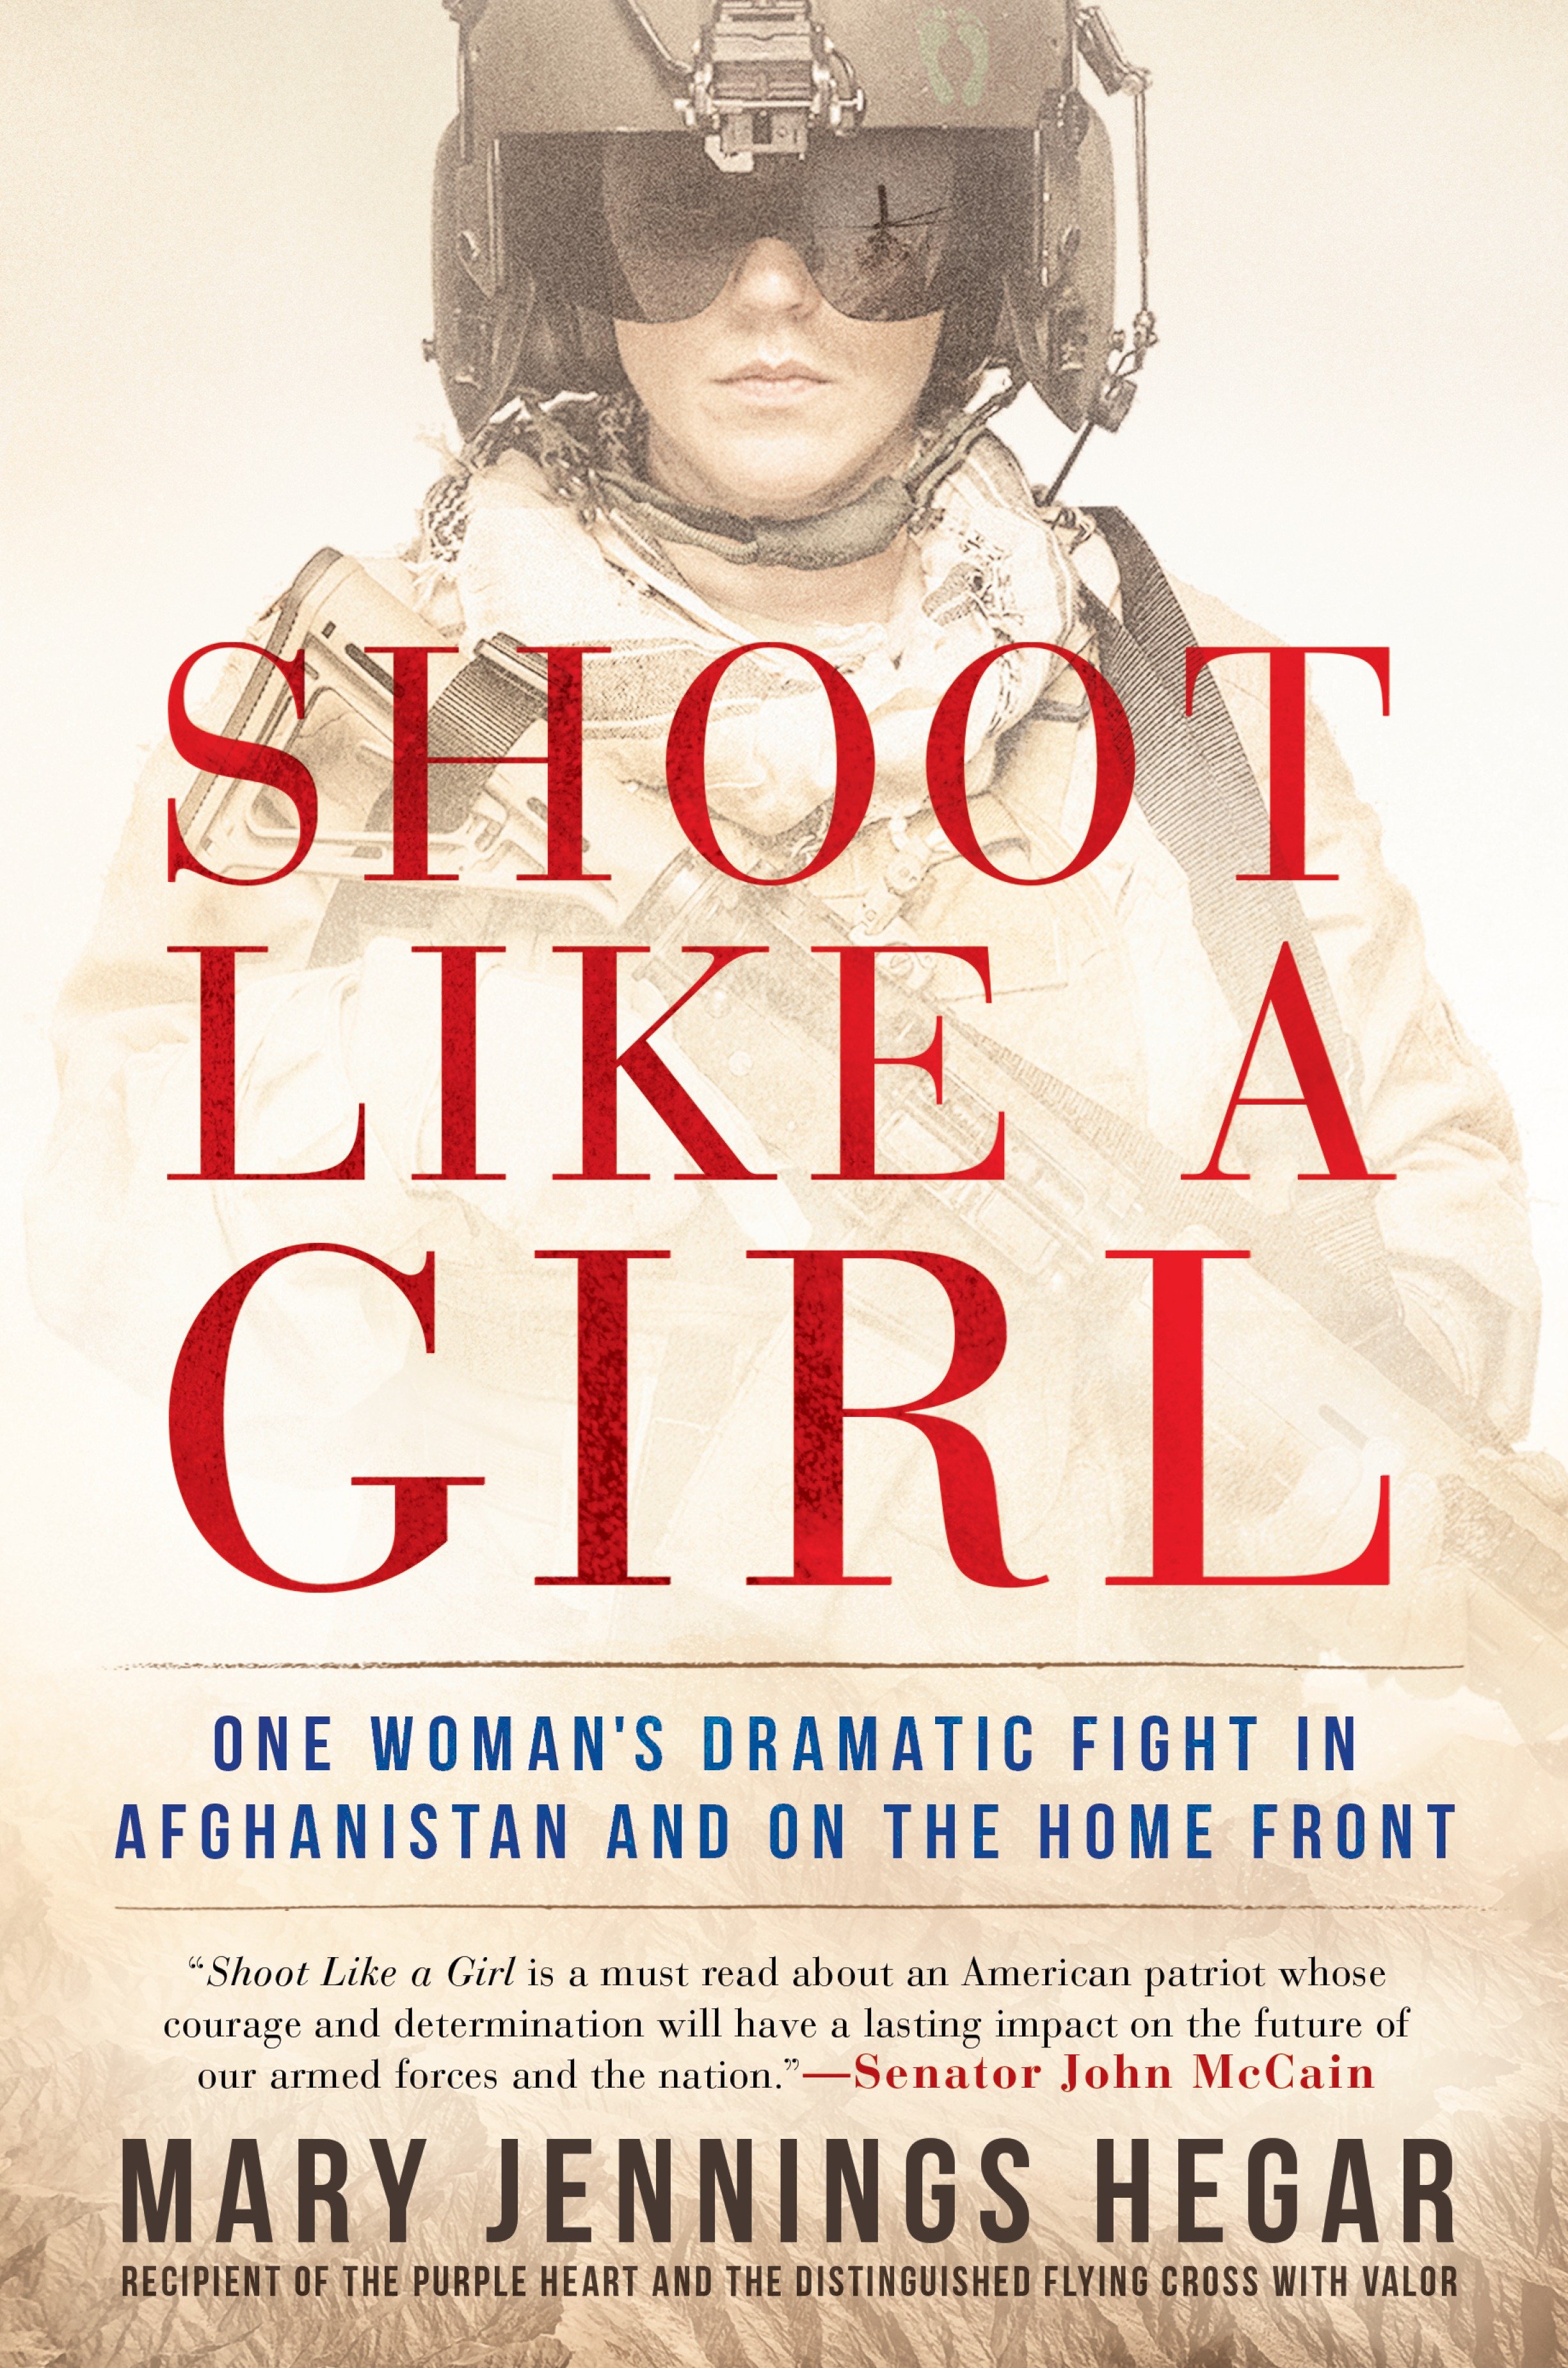 Umschlagbild für Shoot Like a Girl [electronic resource] : One Woman's Dramatic Fight in Afghanistan and on the Home Front